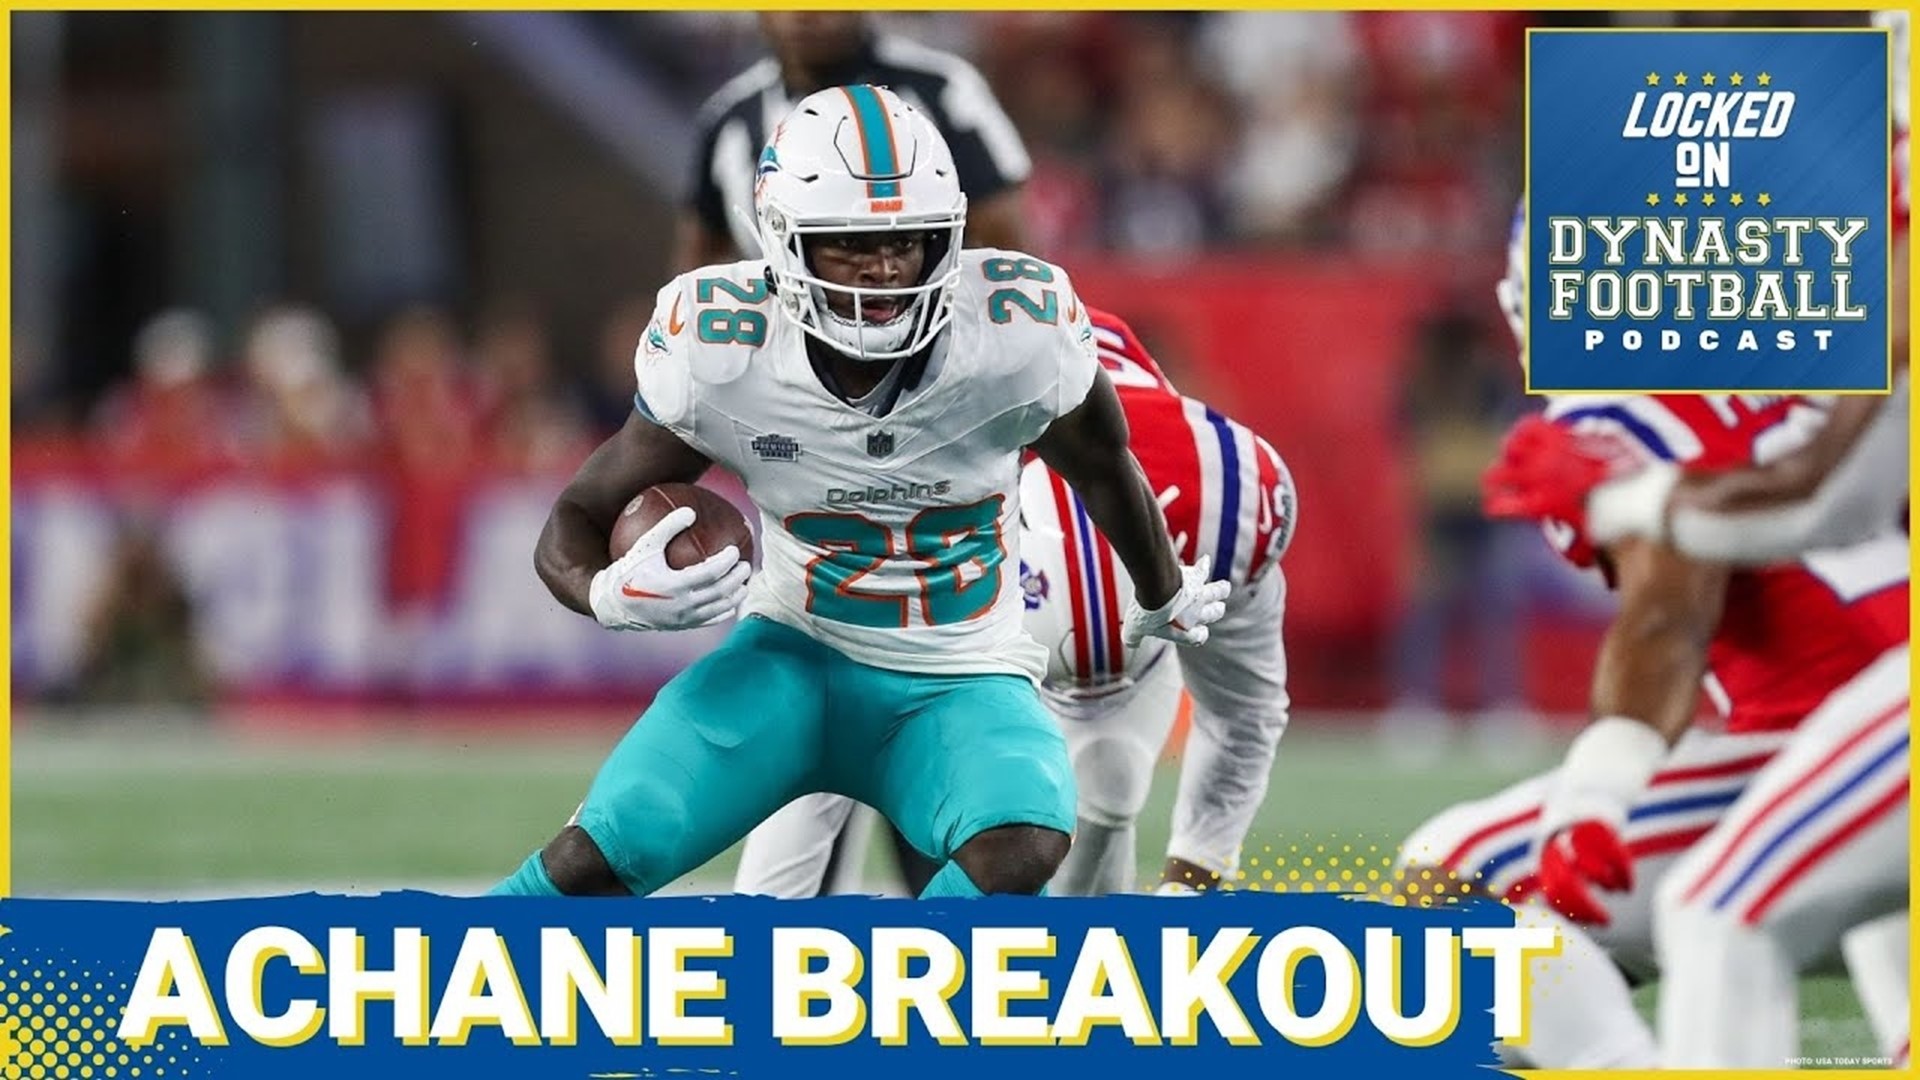 The Dolphins set records in Week Three, throwing up a whopping 70 points against the Broncos, thanks to their running back duo of DeVon Achane and Raheem Mostert.